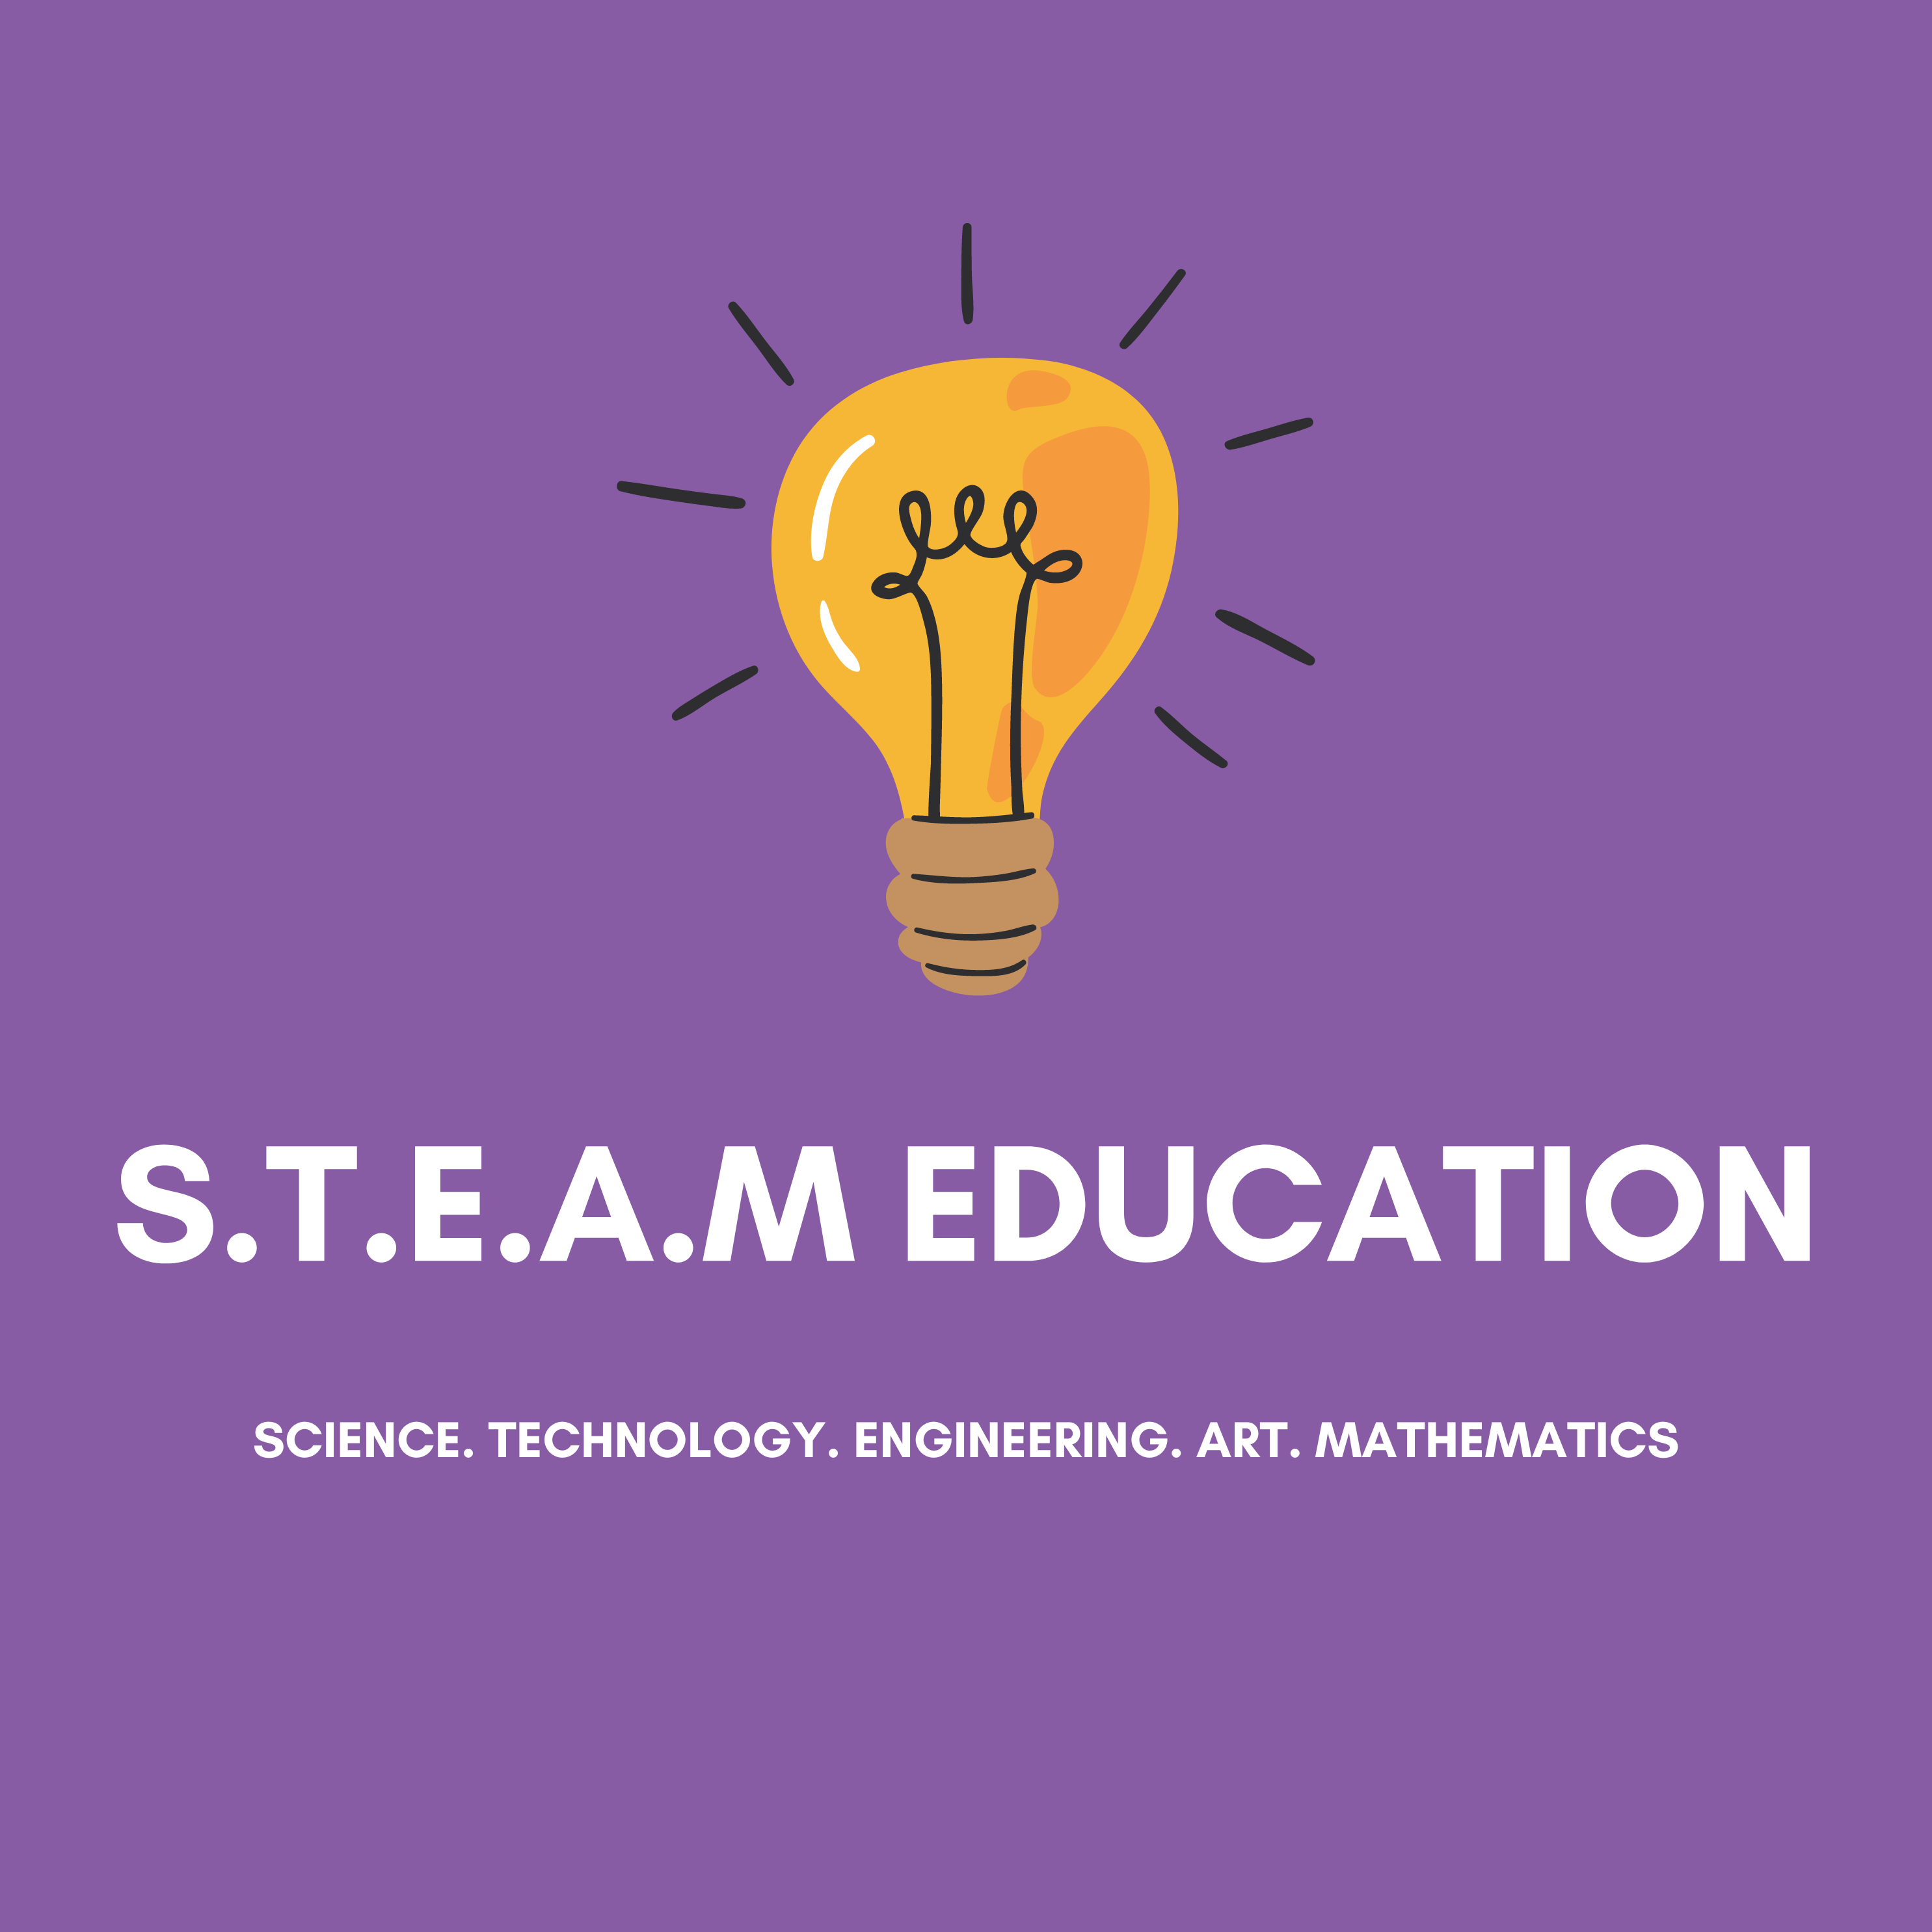 WHAT IS S.T.E.A.M. EDUCATION?